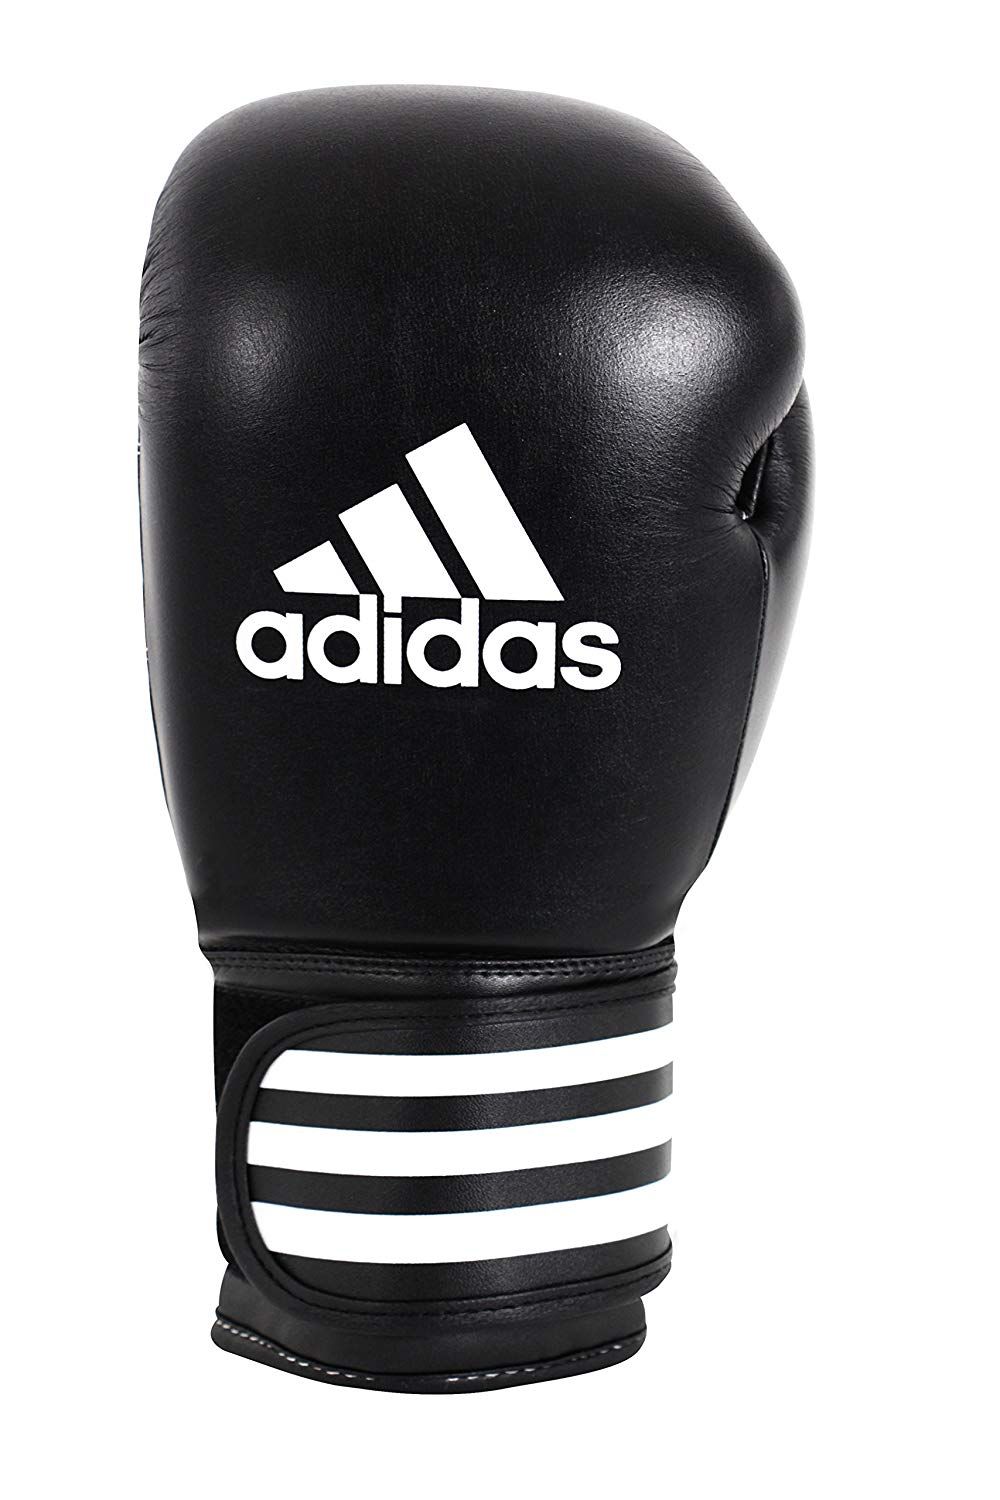 Adidas Performer Boxing Boxing - Gloves Alley